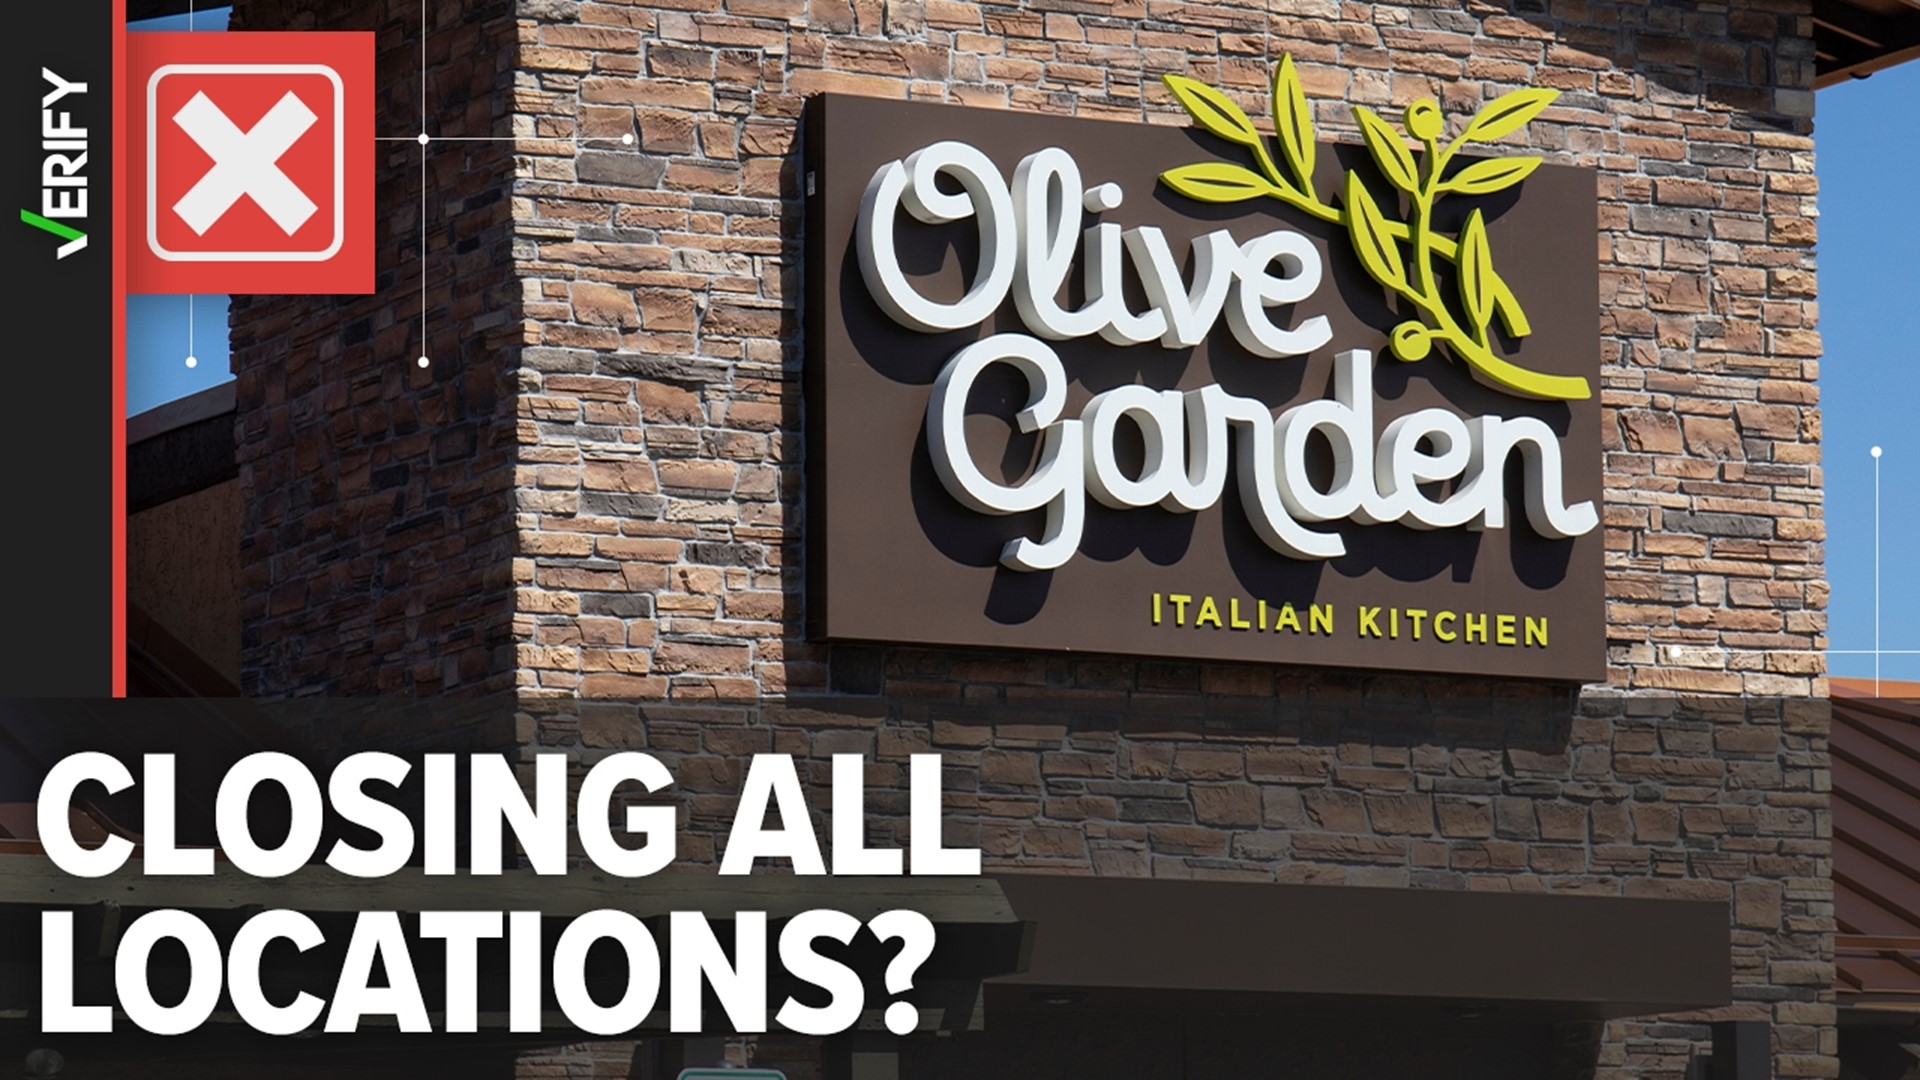 Olive Garden has no plans to permanently close in 2023 or 2024